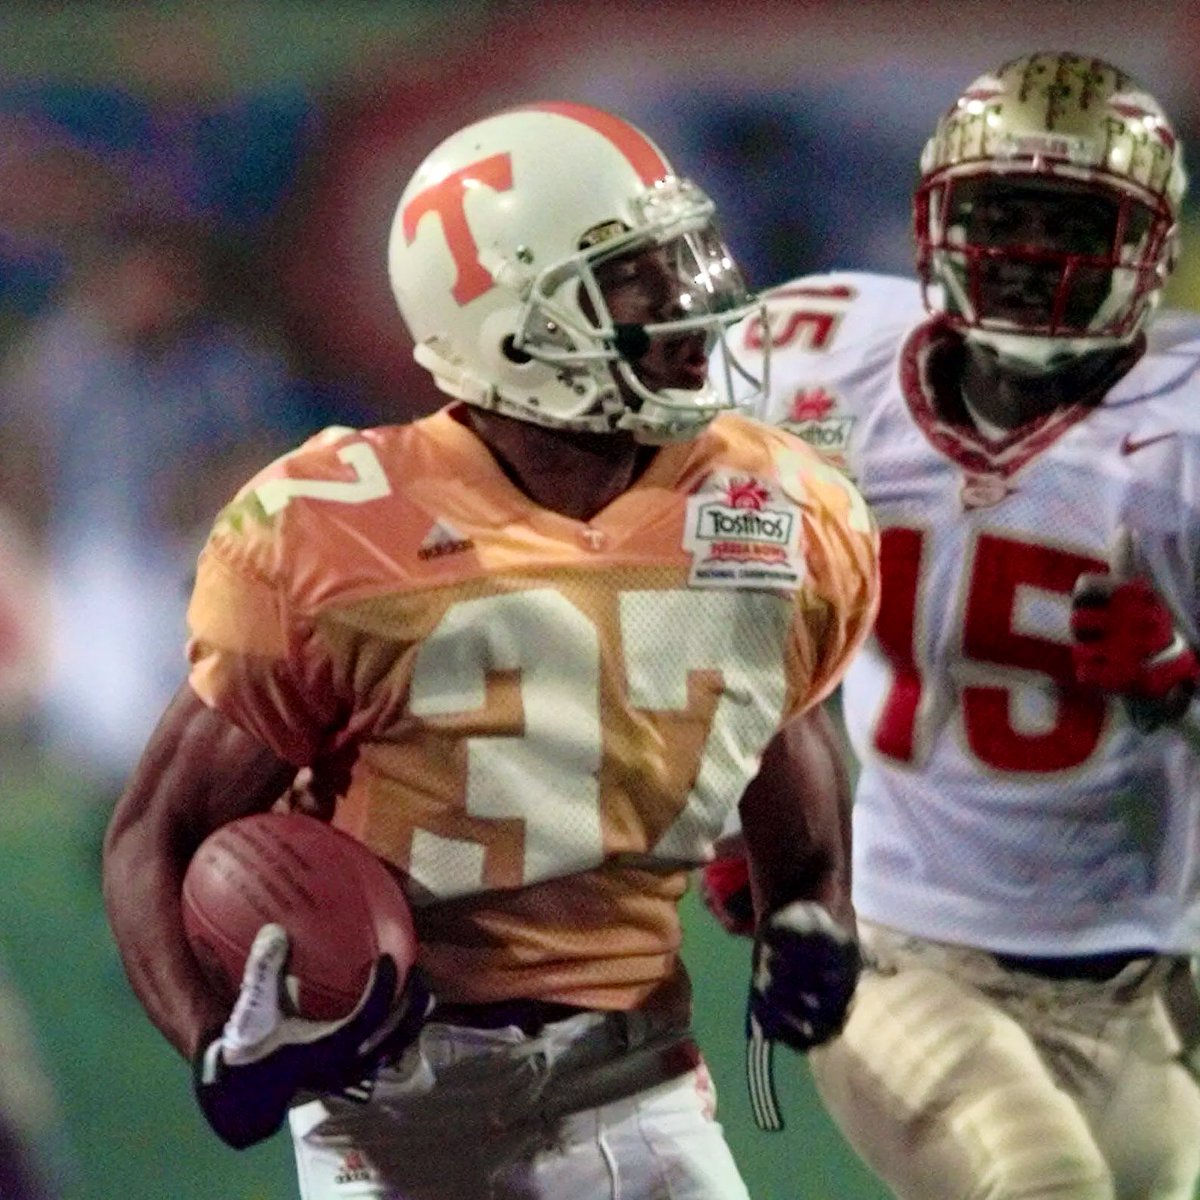 Question of the Day: Who are the 3 best wide receivers in Tennessee history?